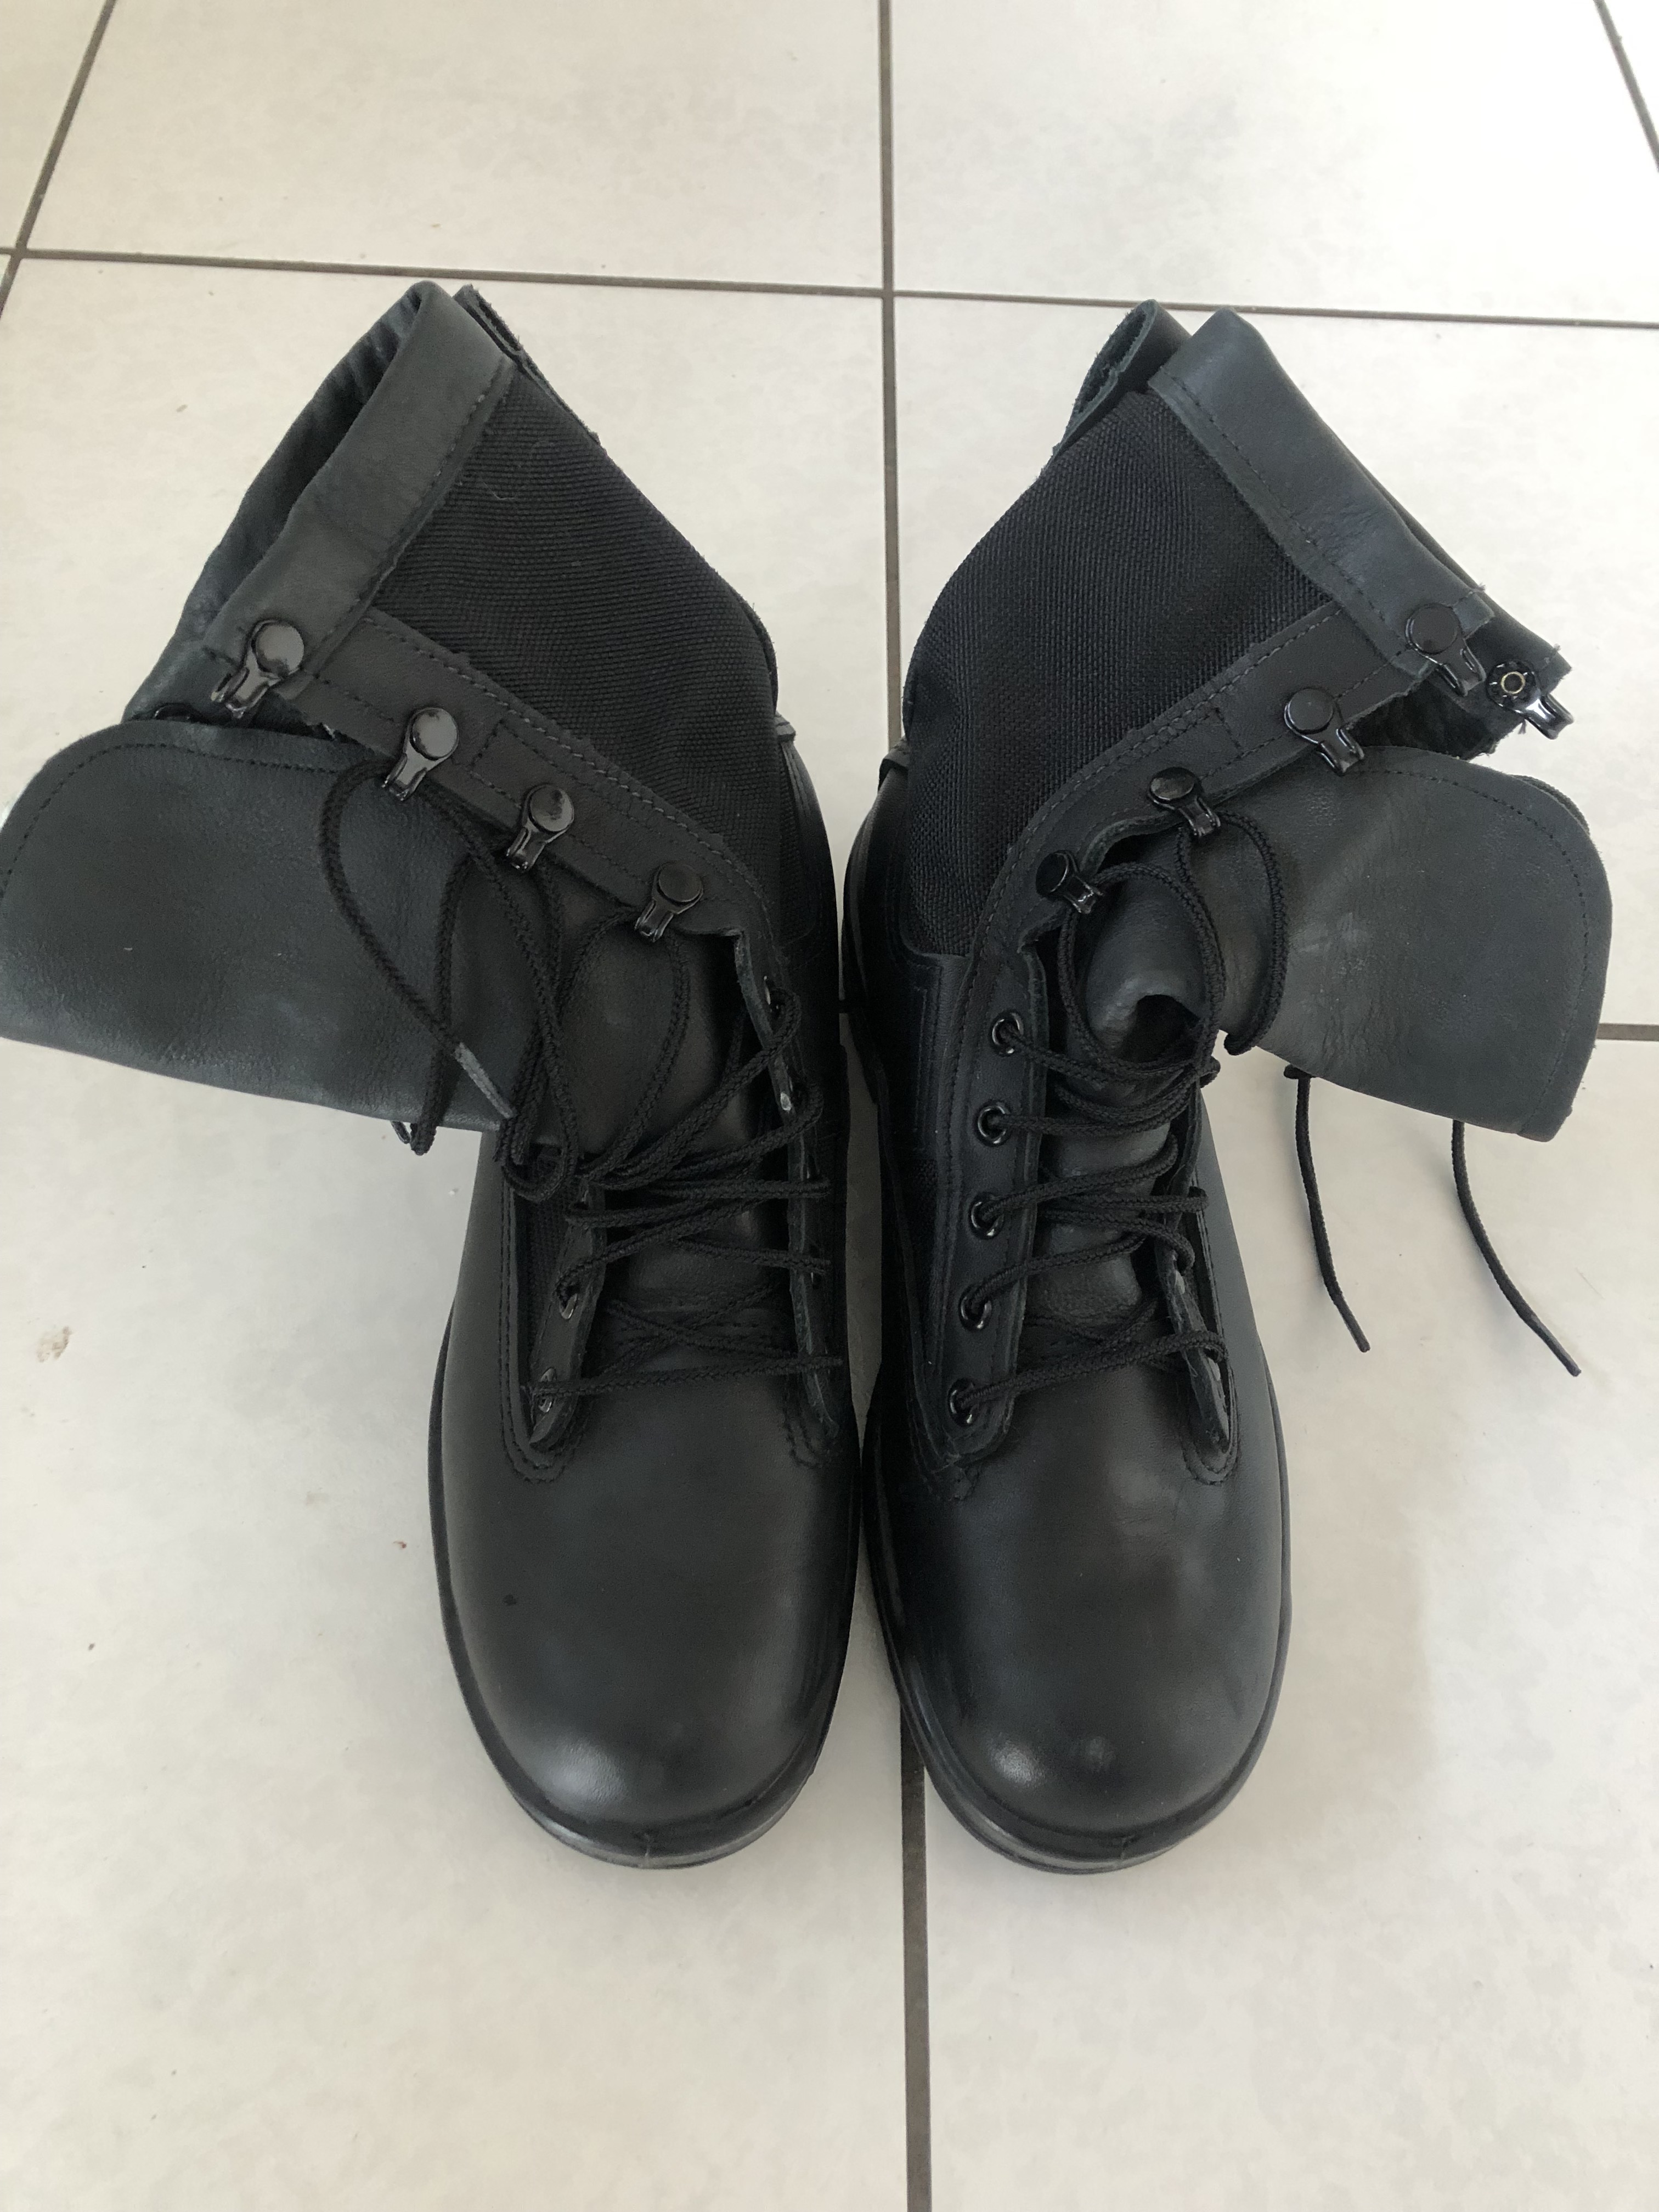 Belleville Combat boots size 5 and size 6.5 - Sales and Wants - Air ...